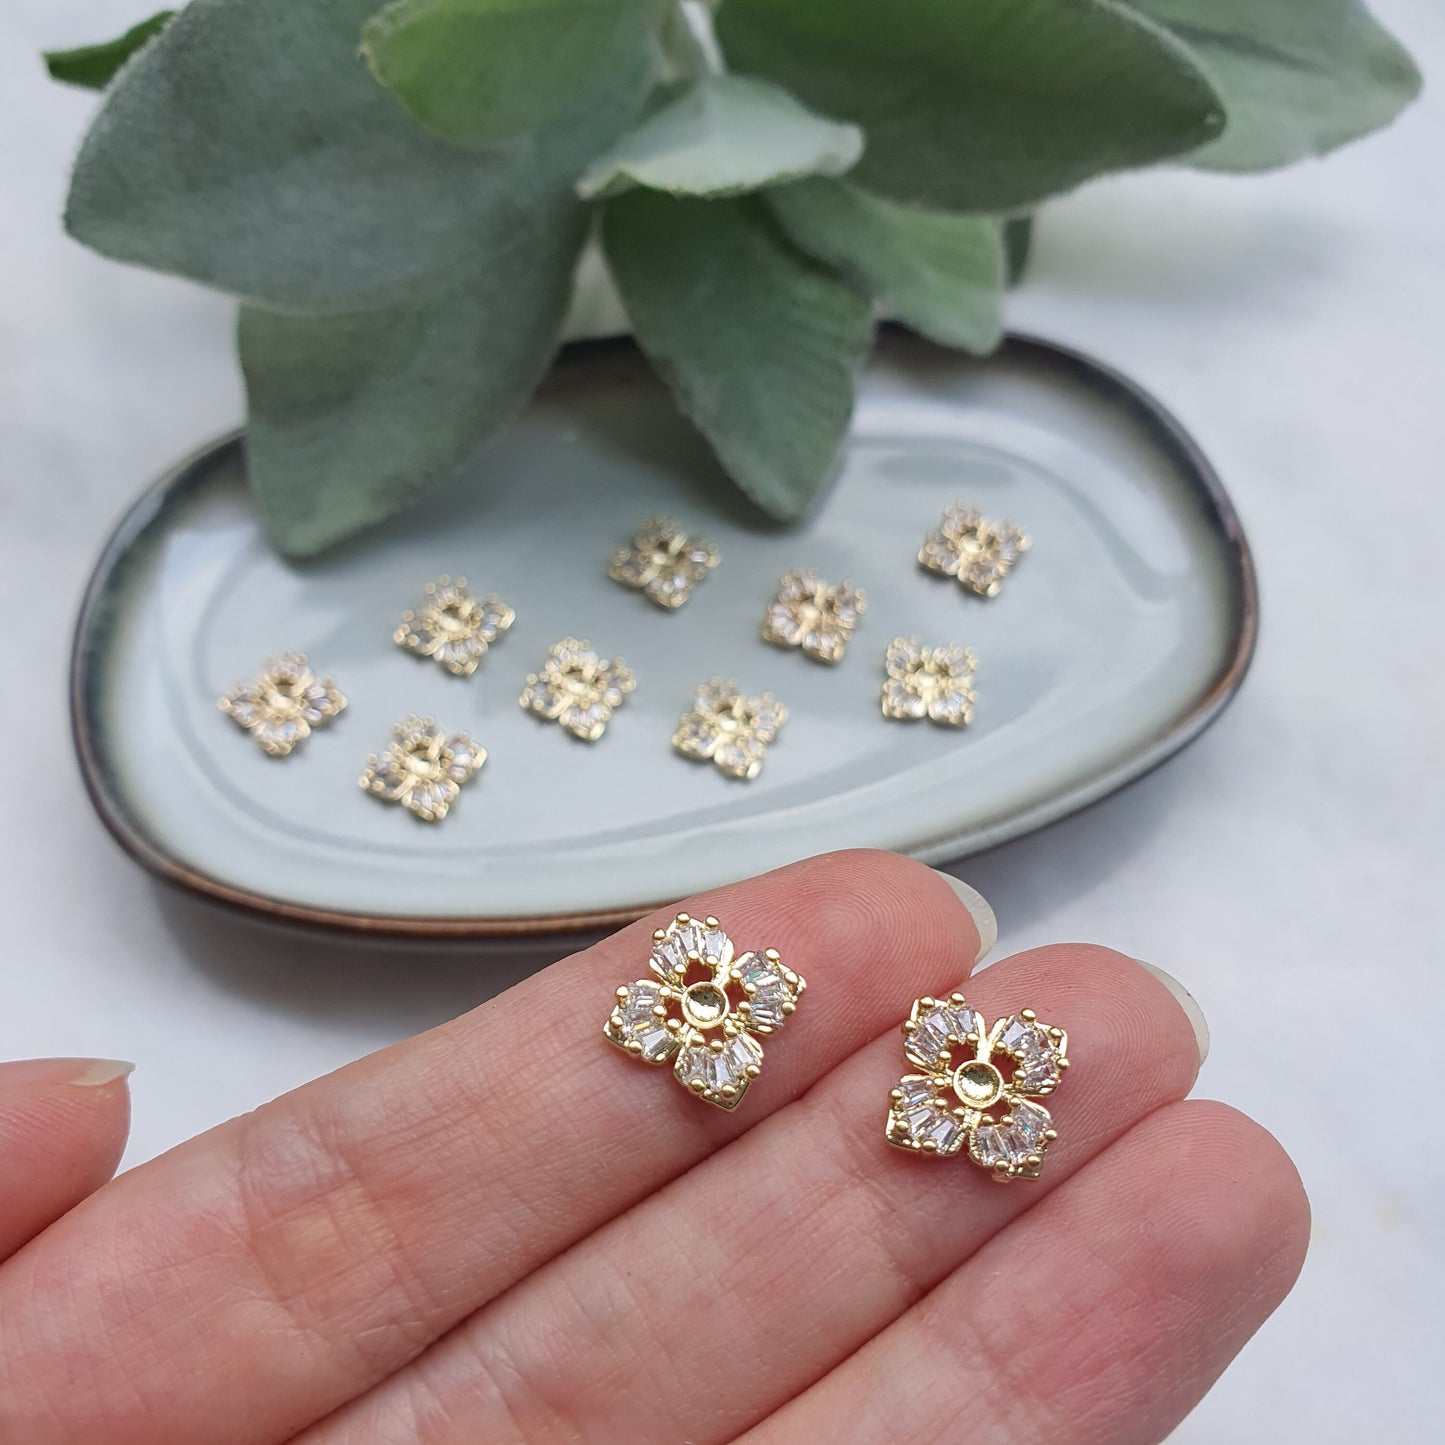 Flower center Zircon charms pendants Crystal connector Earrings component findings DIY Rhinestone Jewelry supplies Earrings gold plated part